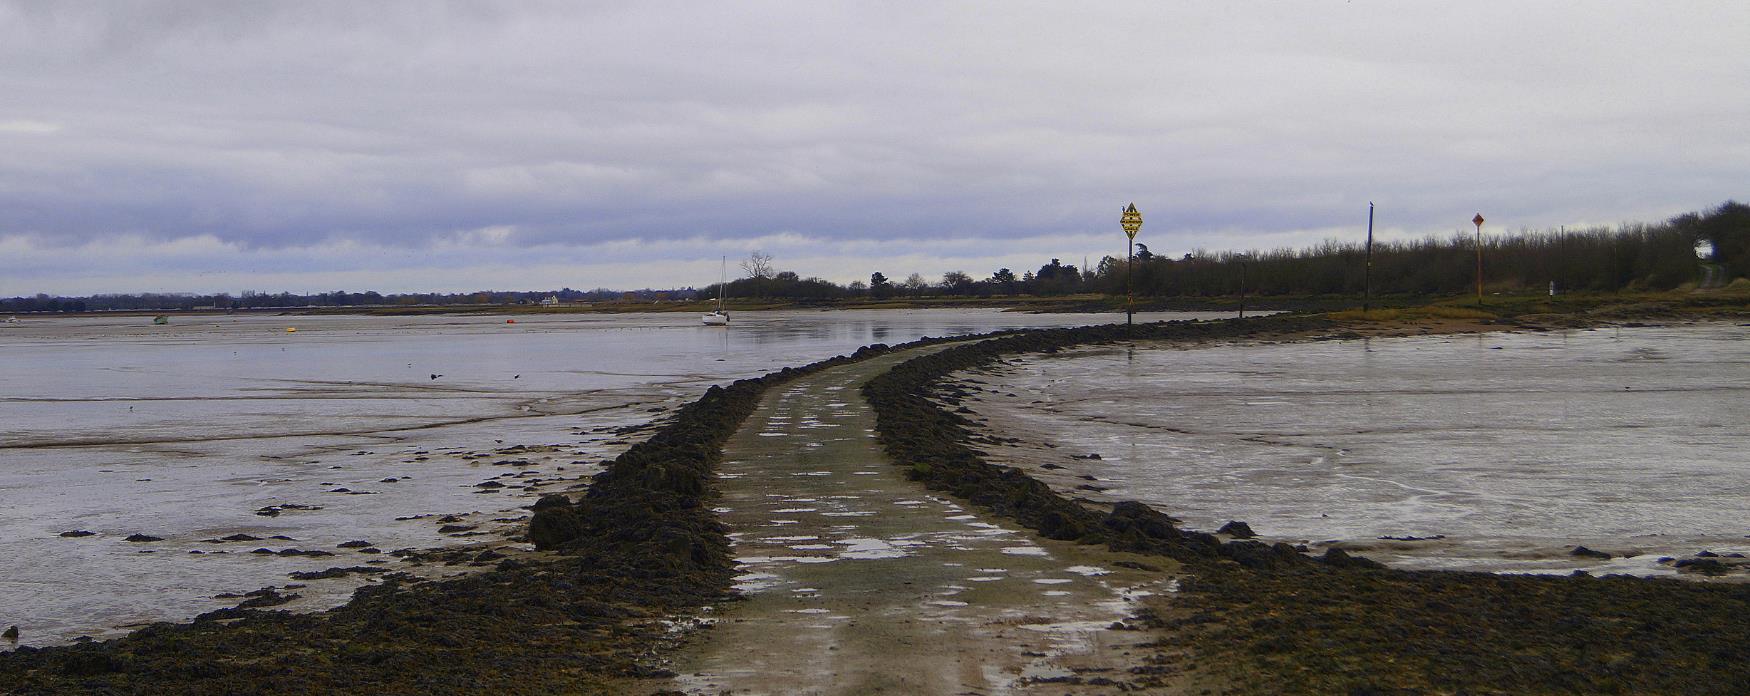 Causeway to Northey Island, the site of the Battle of Maldon